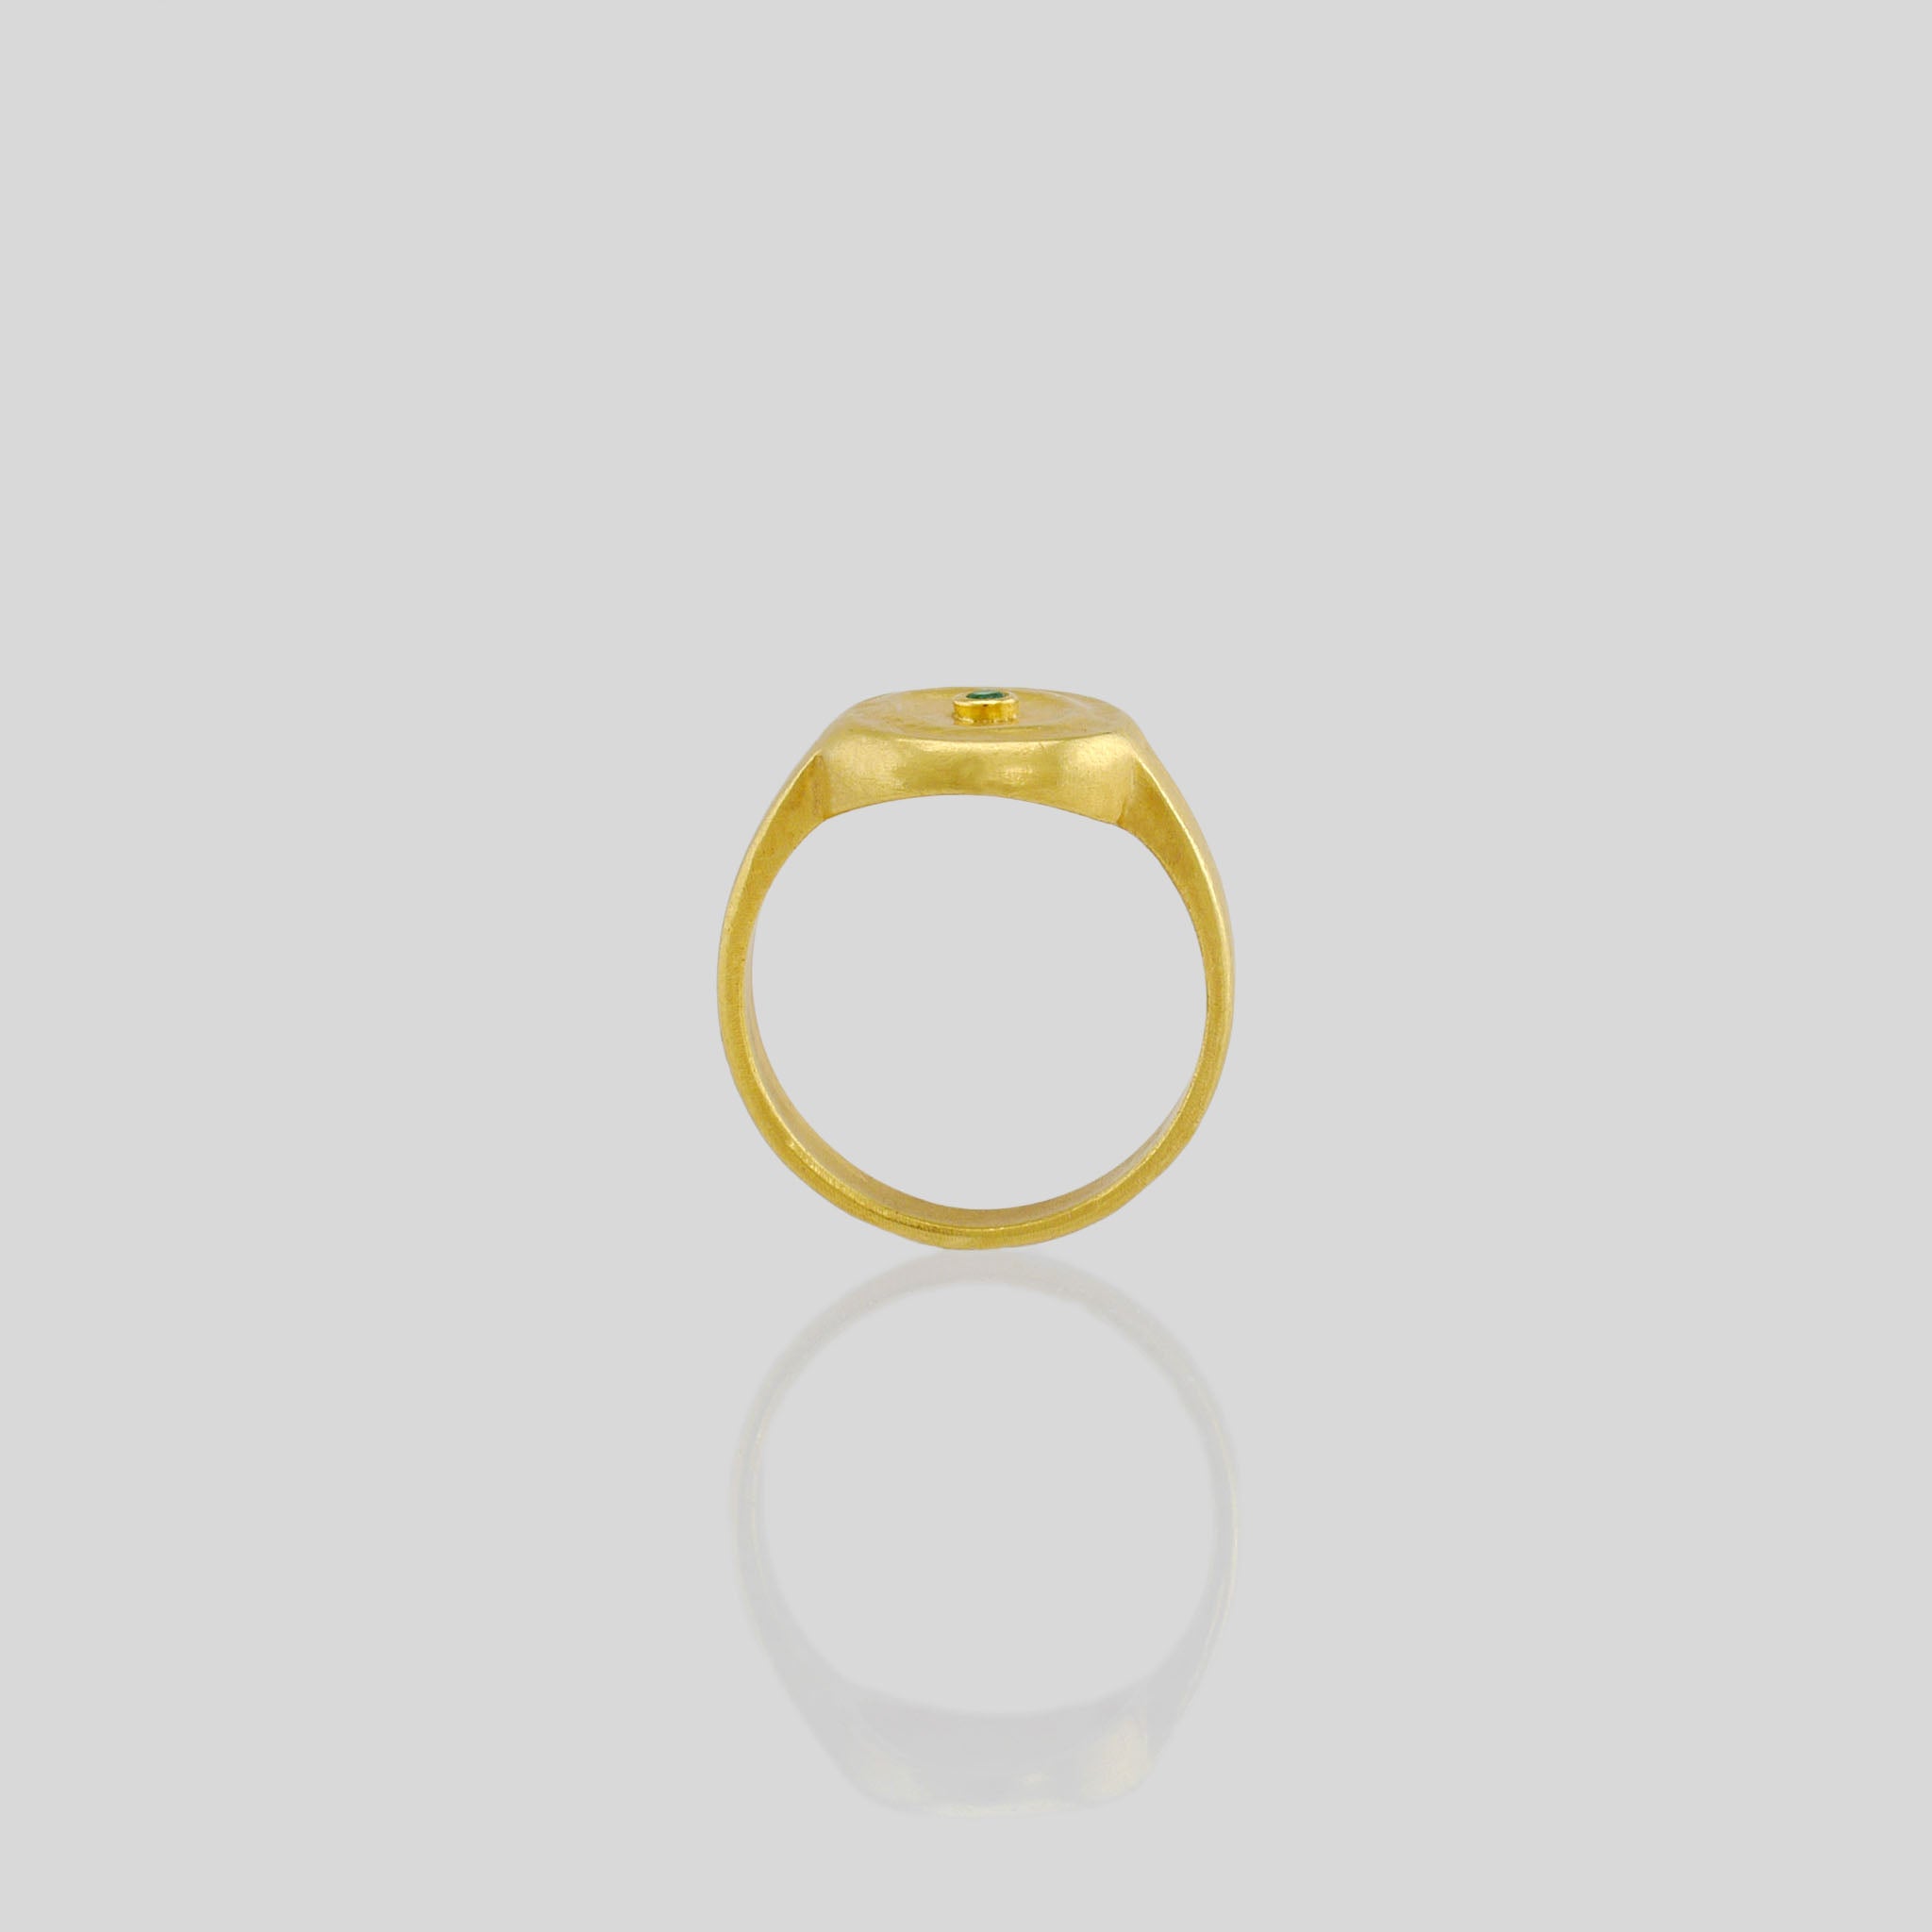 Side view of Handmade 18k Gold ring with a central Emerald, exuding vintage charm reminiscent of the Egyptian pharaohs' era.